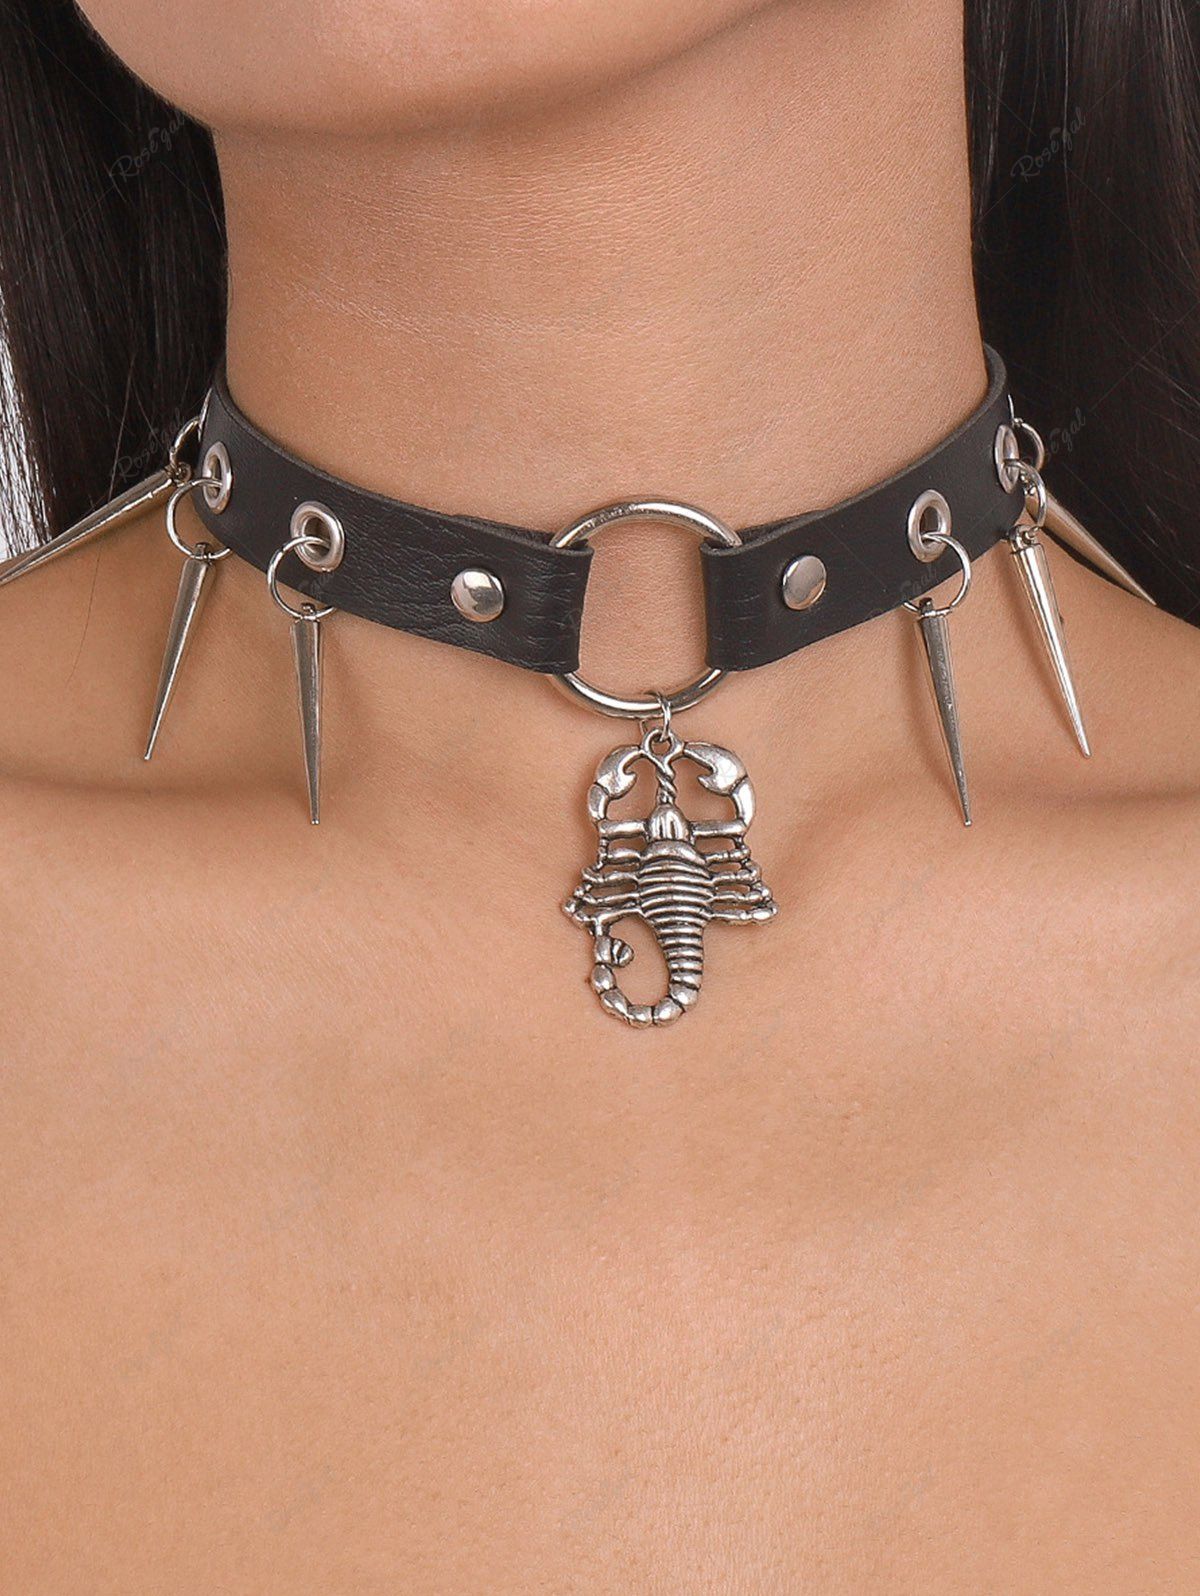 Sale Gothic Studded Grommets Ring Scorpion Choker  